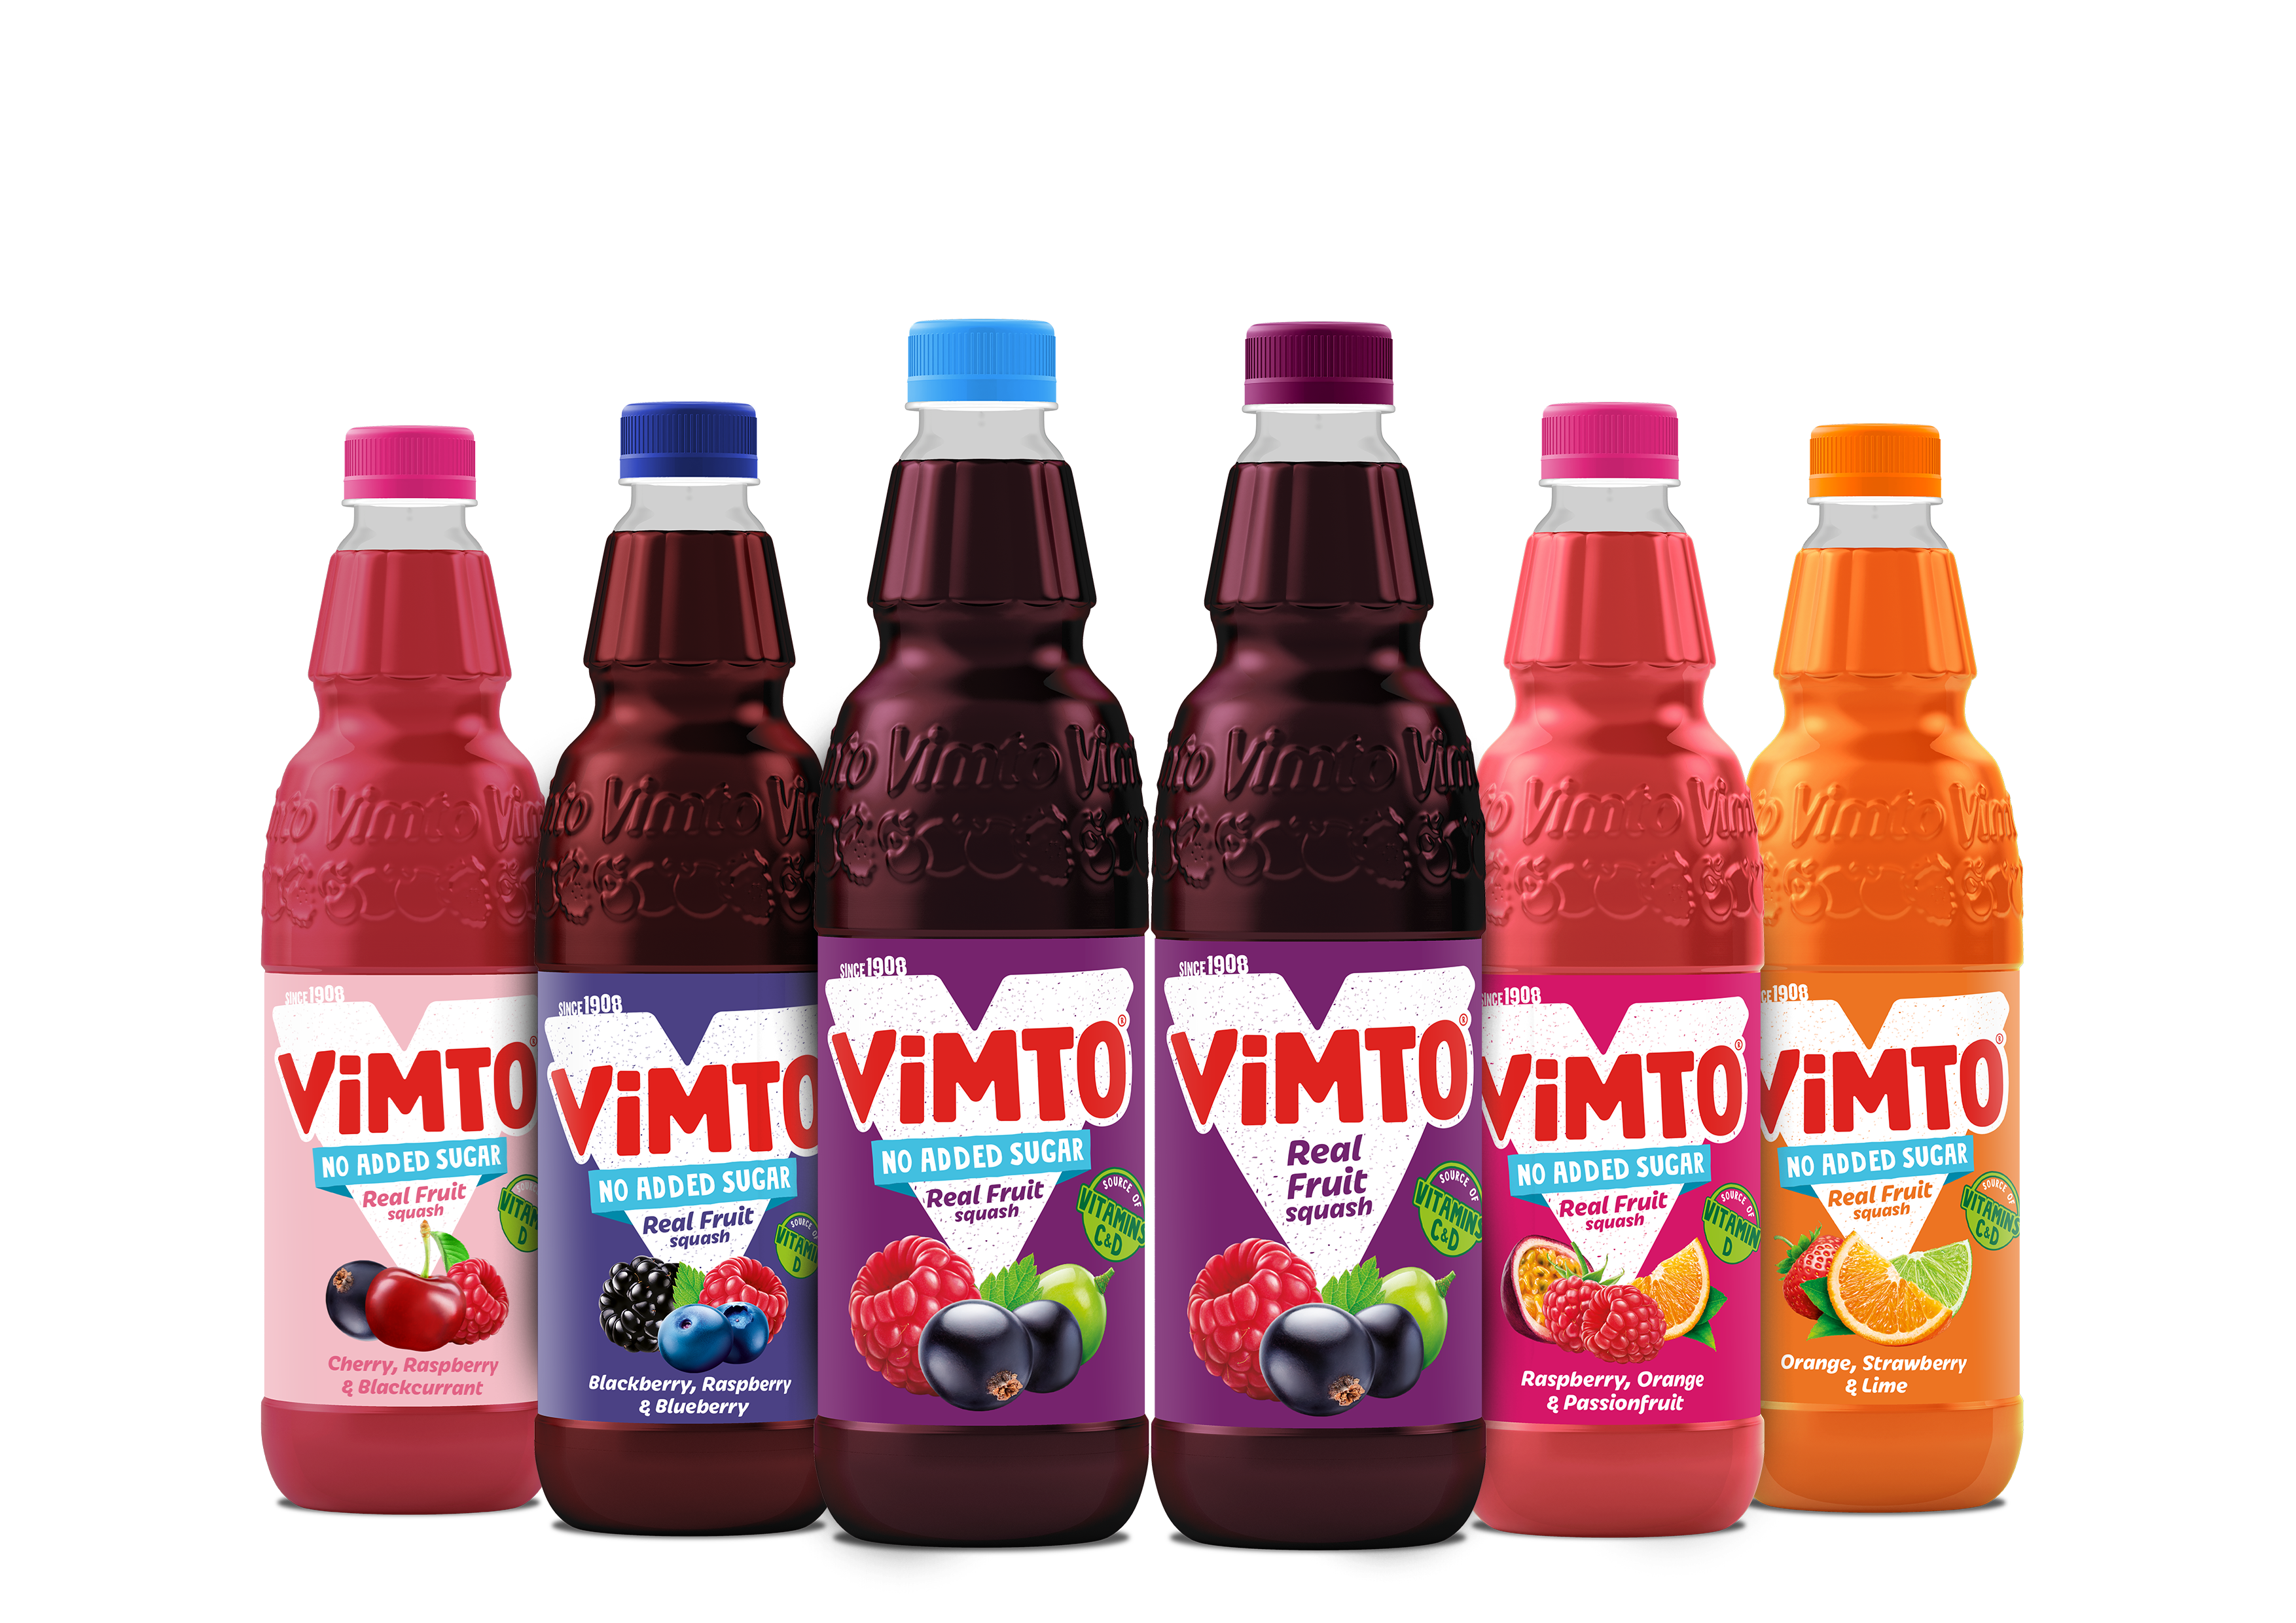 Vimto shakes up squash with new vitamin fortification